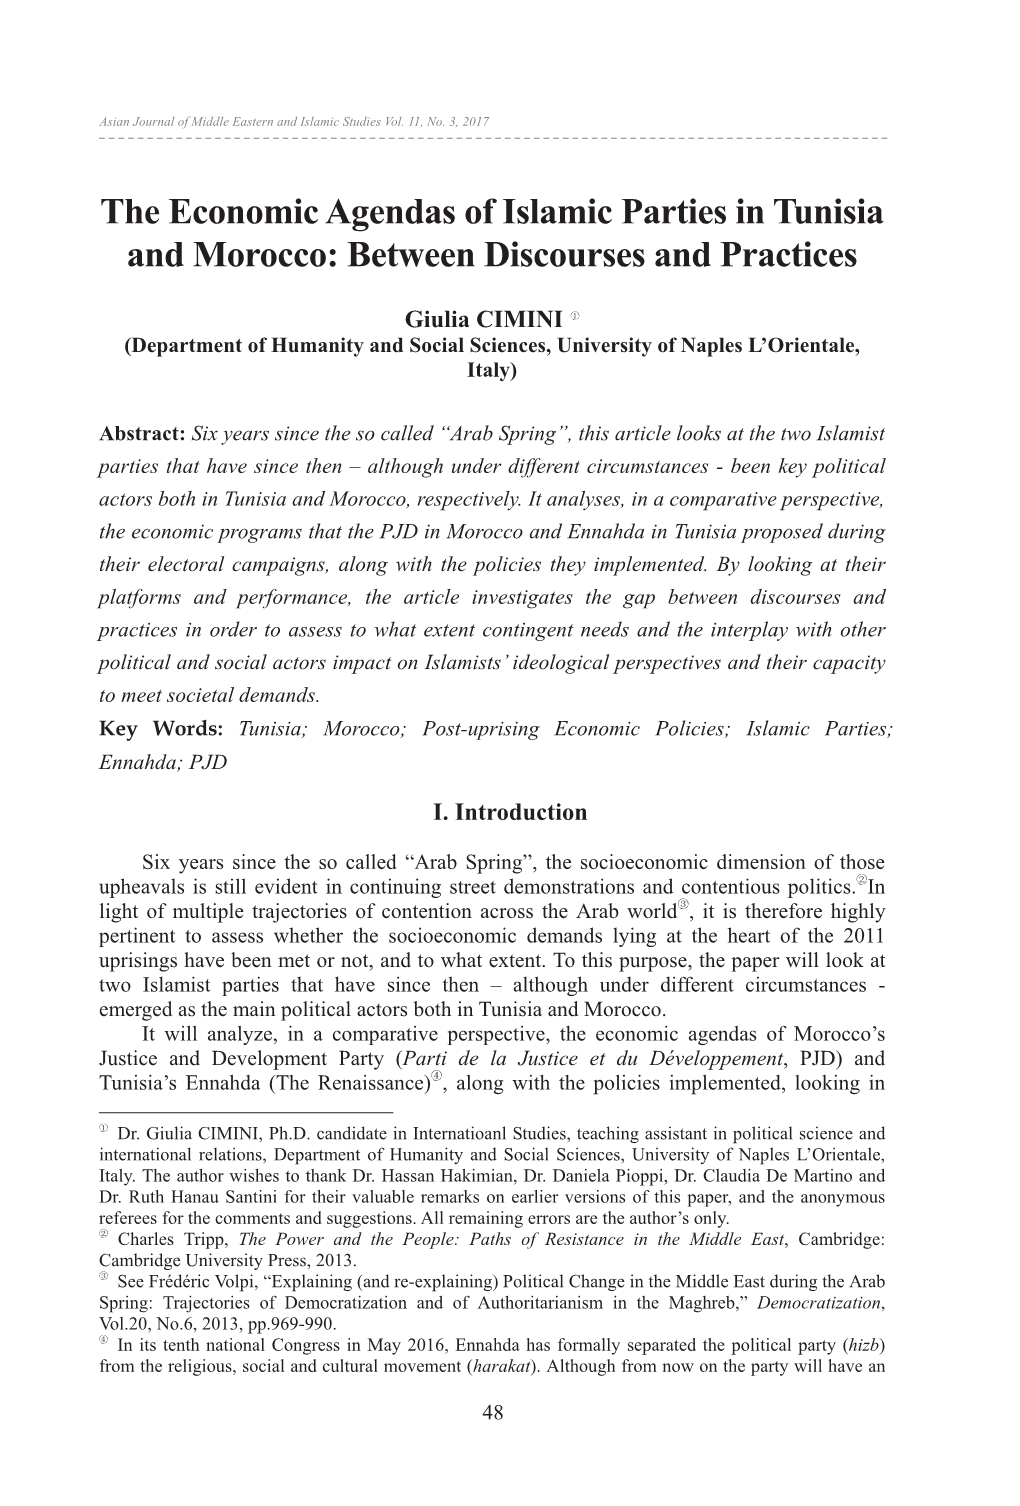 The Economic Agendas of Islamic Parties in Tunisia and Morocco: Between Discourses and Practices Asian Journal of Middle Eastern and Islamic Studies Vol